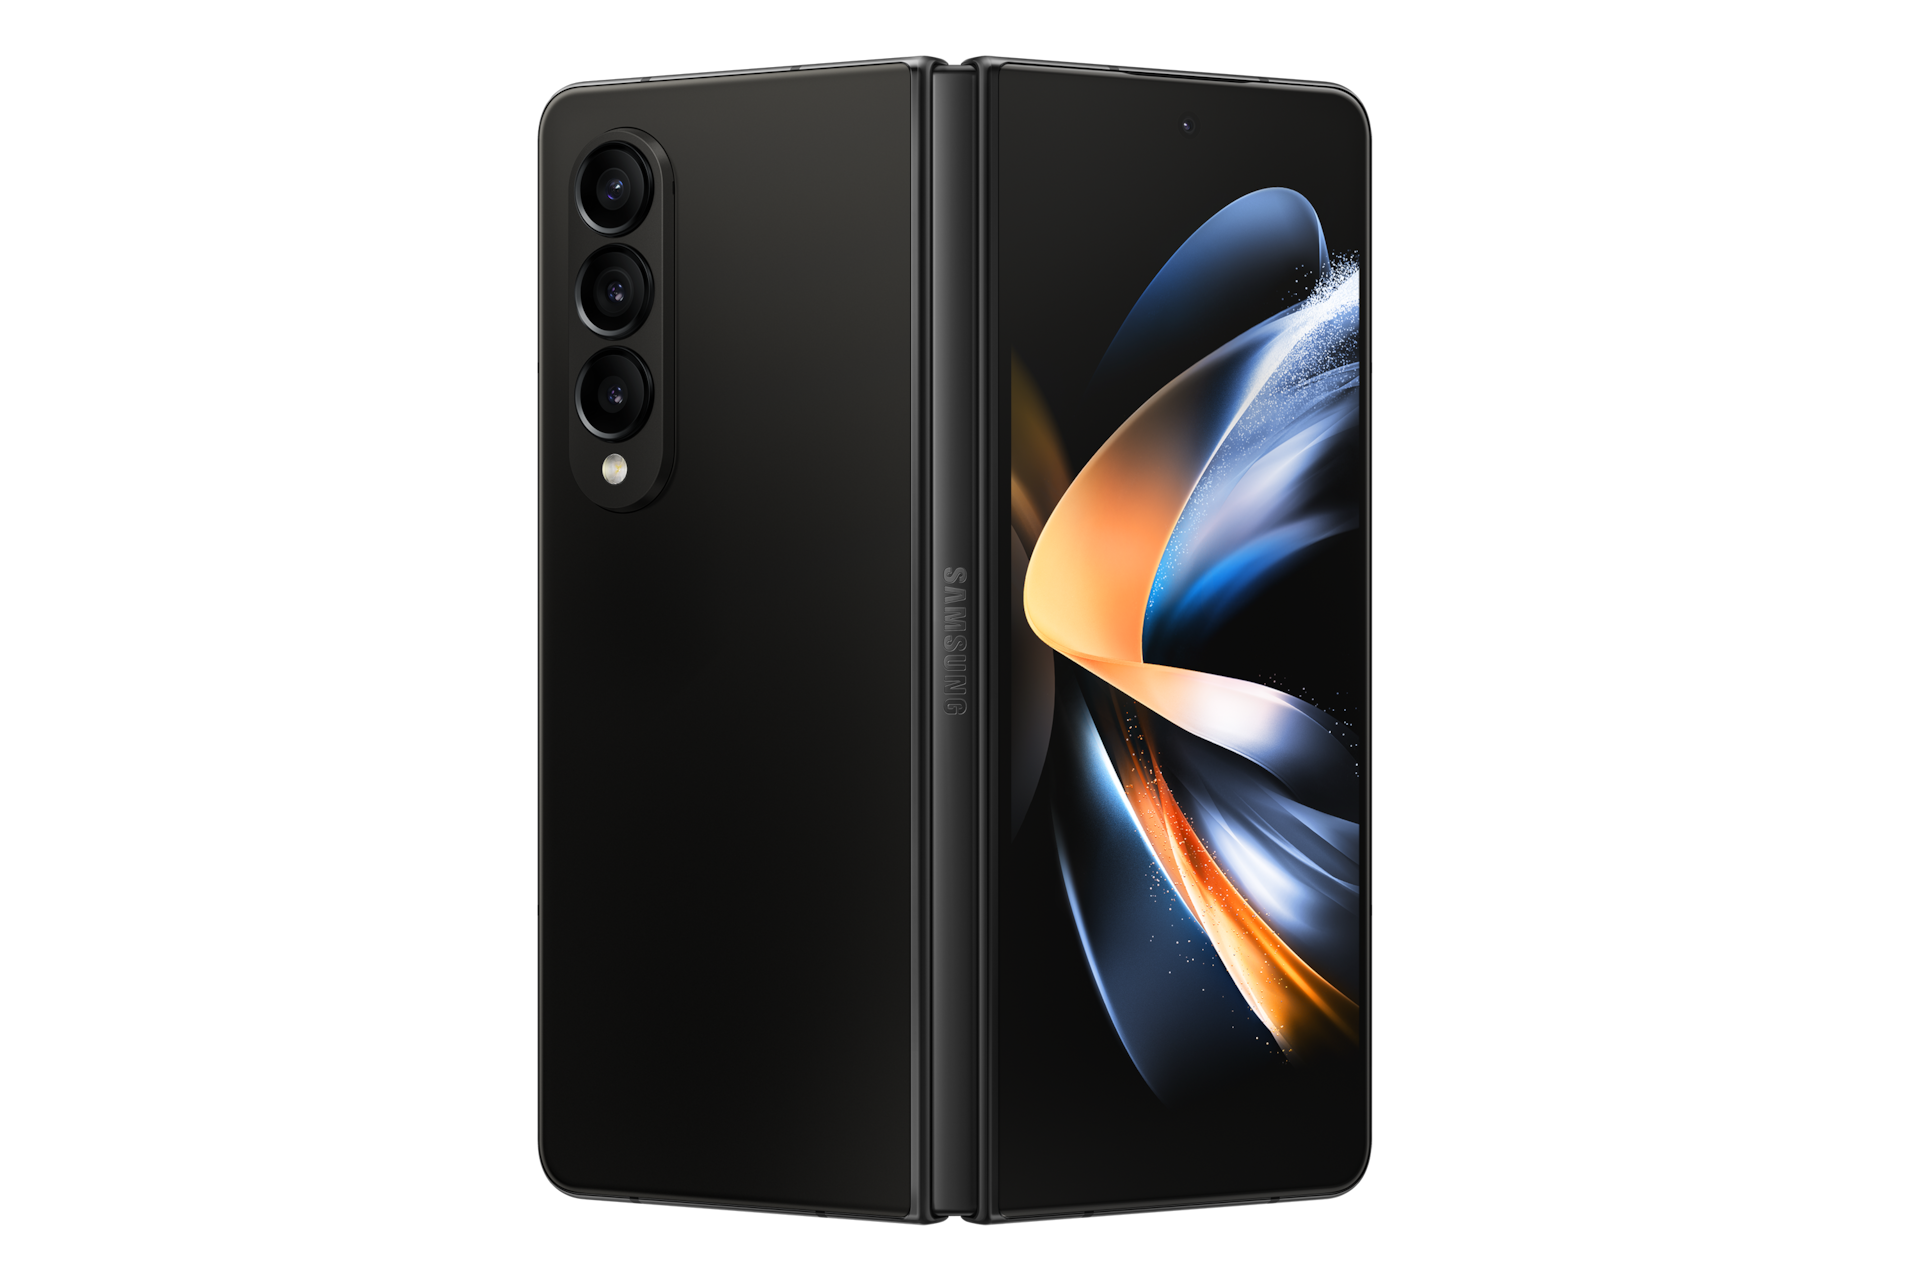 See Galaxy Fold 4 5G 256 GB specs, price, and discounts. Buy it now with promotions at Samsung Official Store in the Philippines. Partially unfolded Galaxy Fold4 in Phantom Black